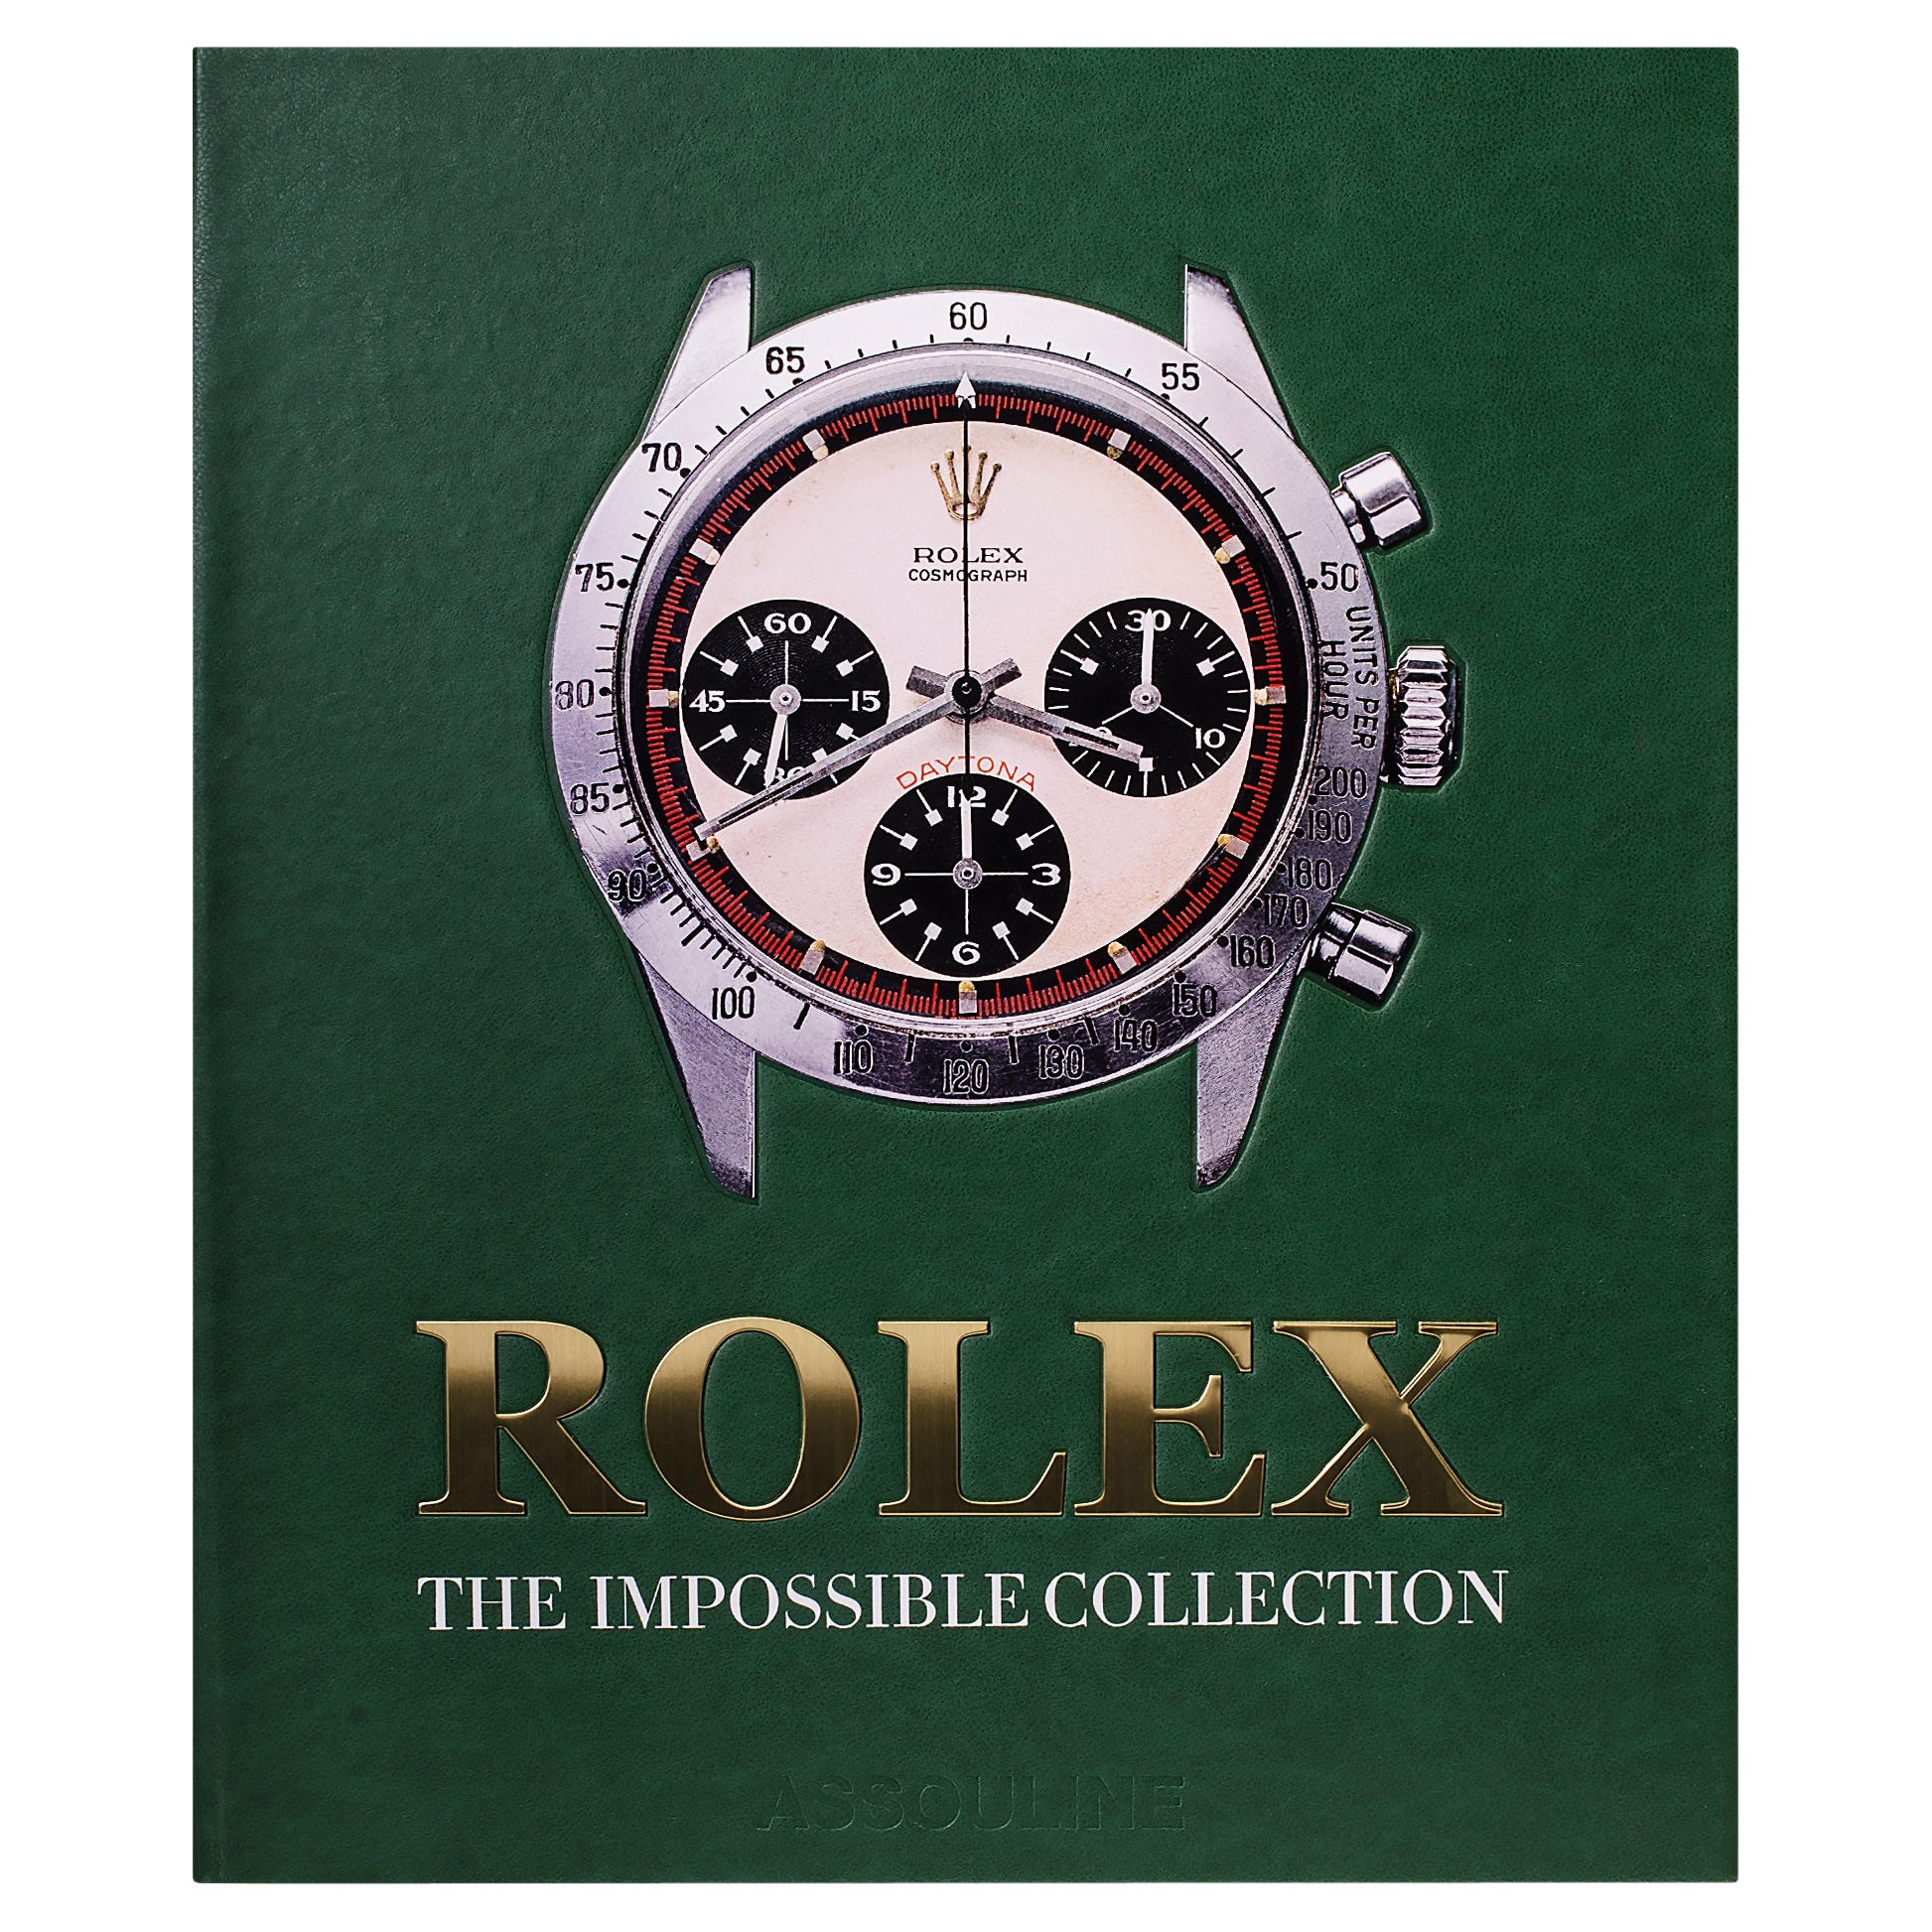 For more than a century, Rolex stands apart as the most coveted and most legendary brand of watches in the world. A Rolex connotes many things: the quintessence of the luxury timepiece, a tool of power for movers and shakers, the symbol of passage